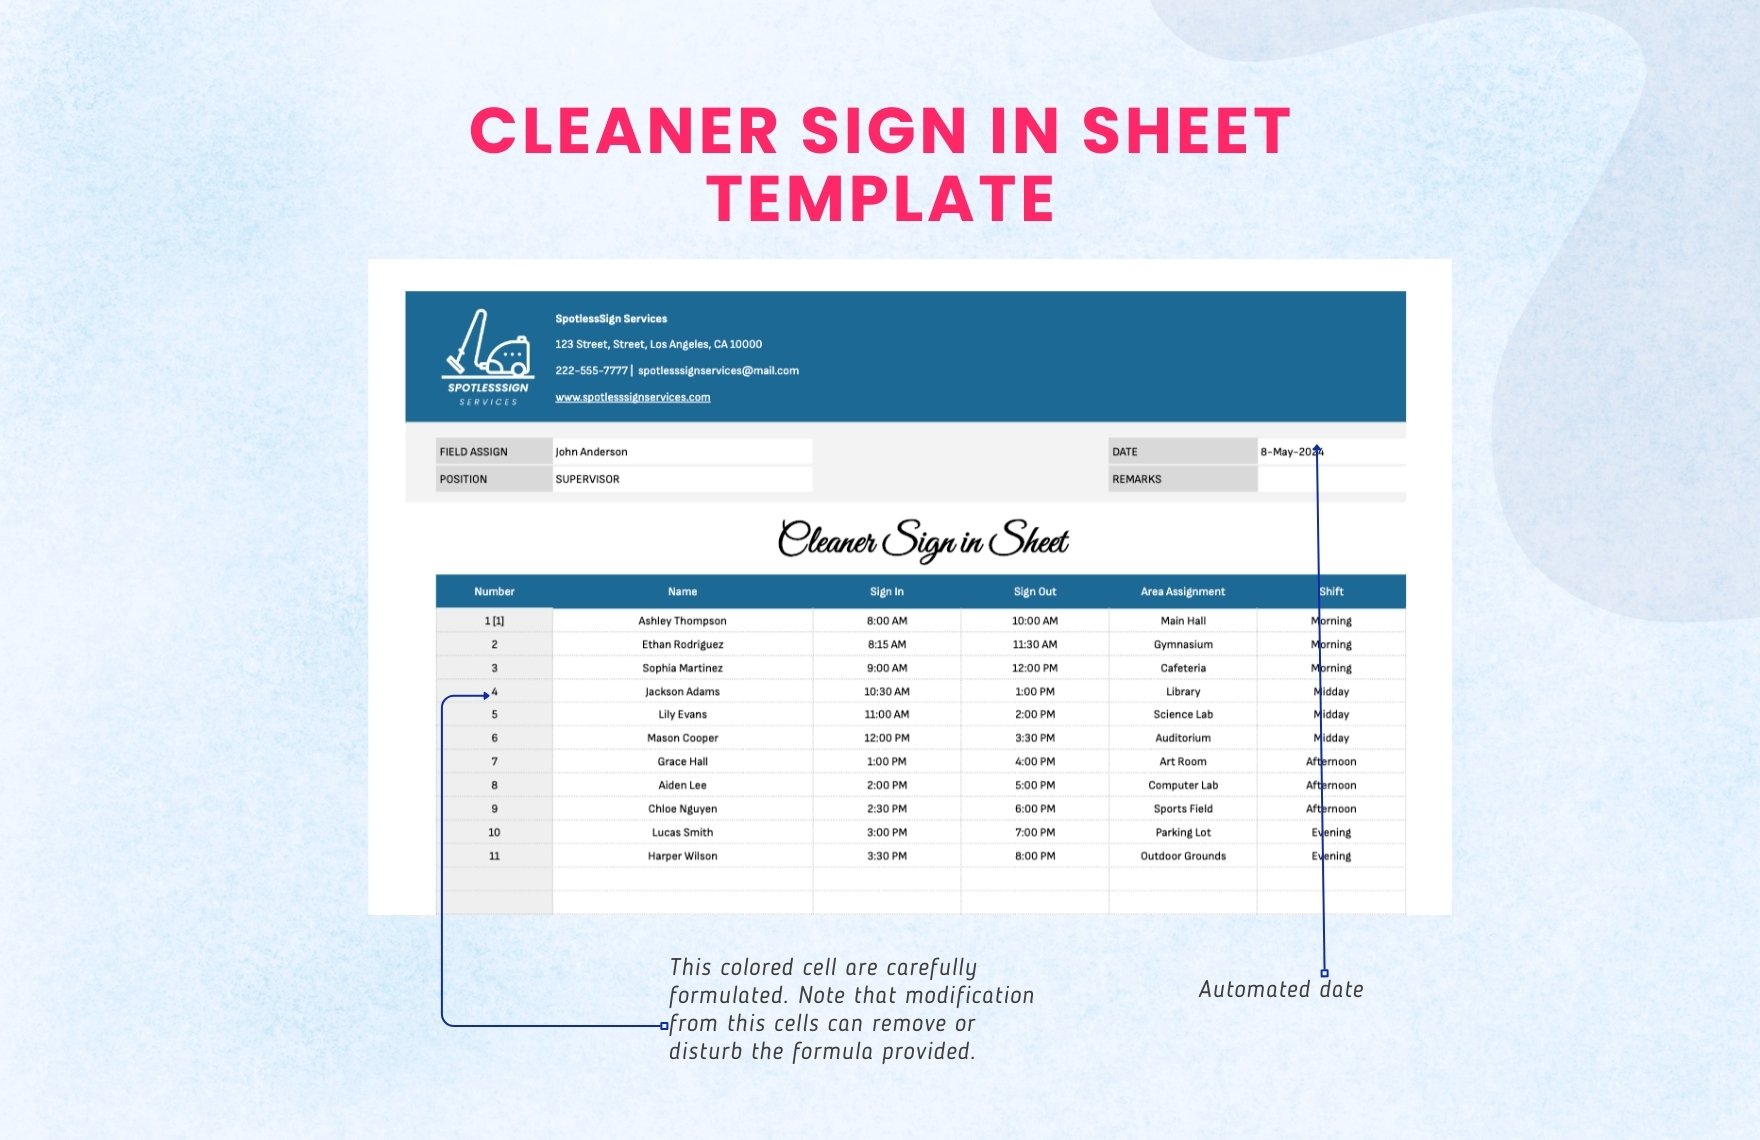 Cleaner Sign in Sheet Template